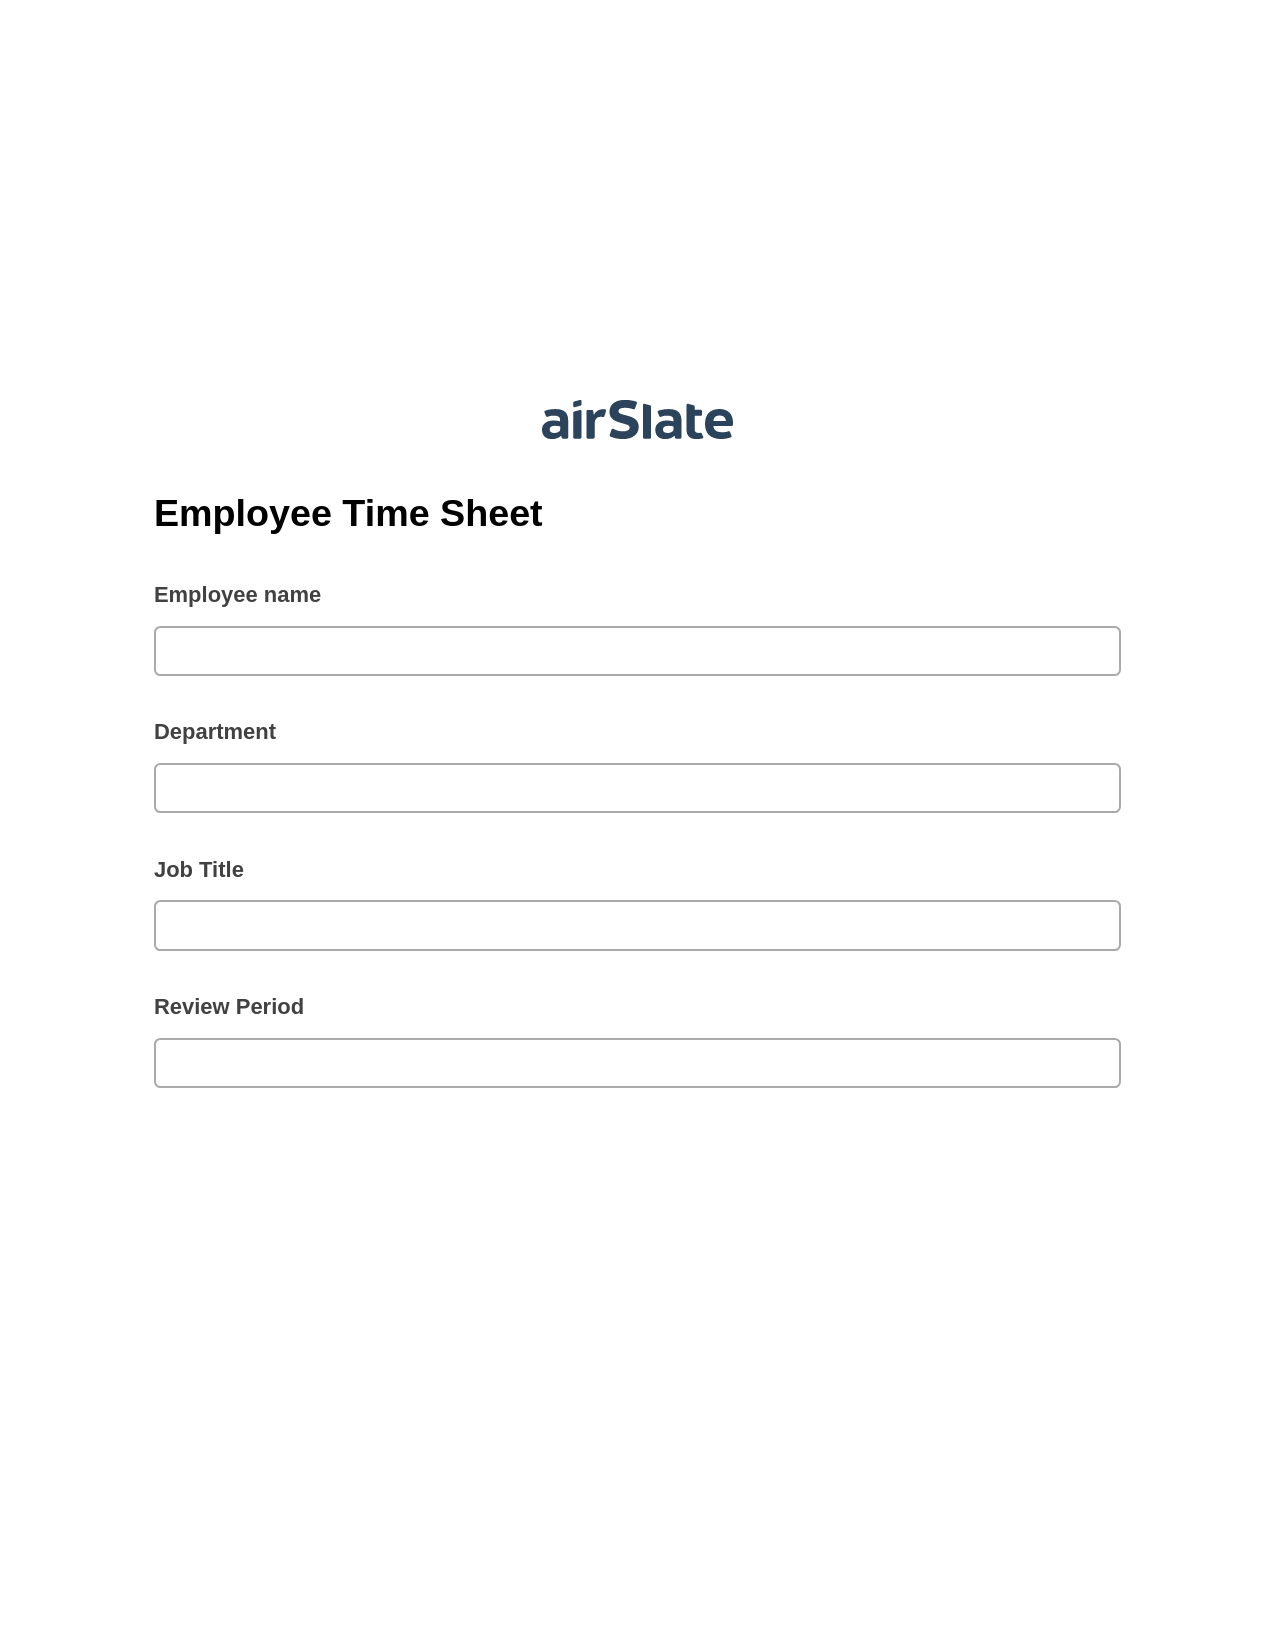 Employee Time Sheet Pre-fill Document Bot, Create slate addon, Archive to Box Bot